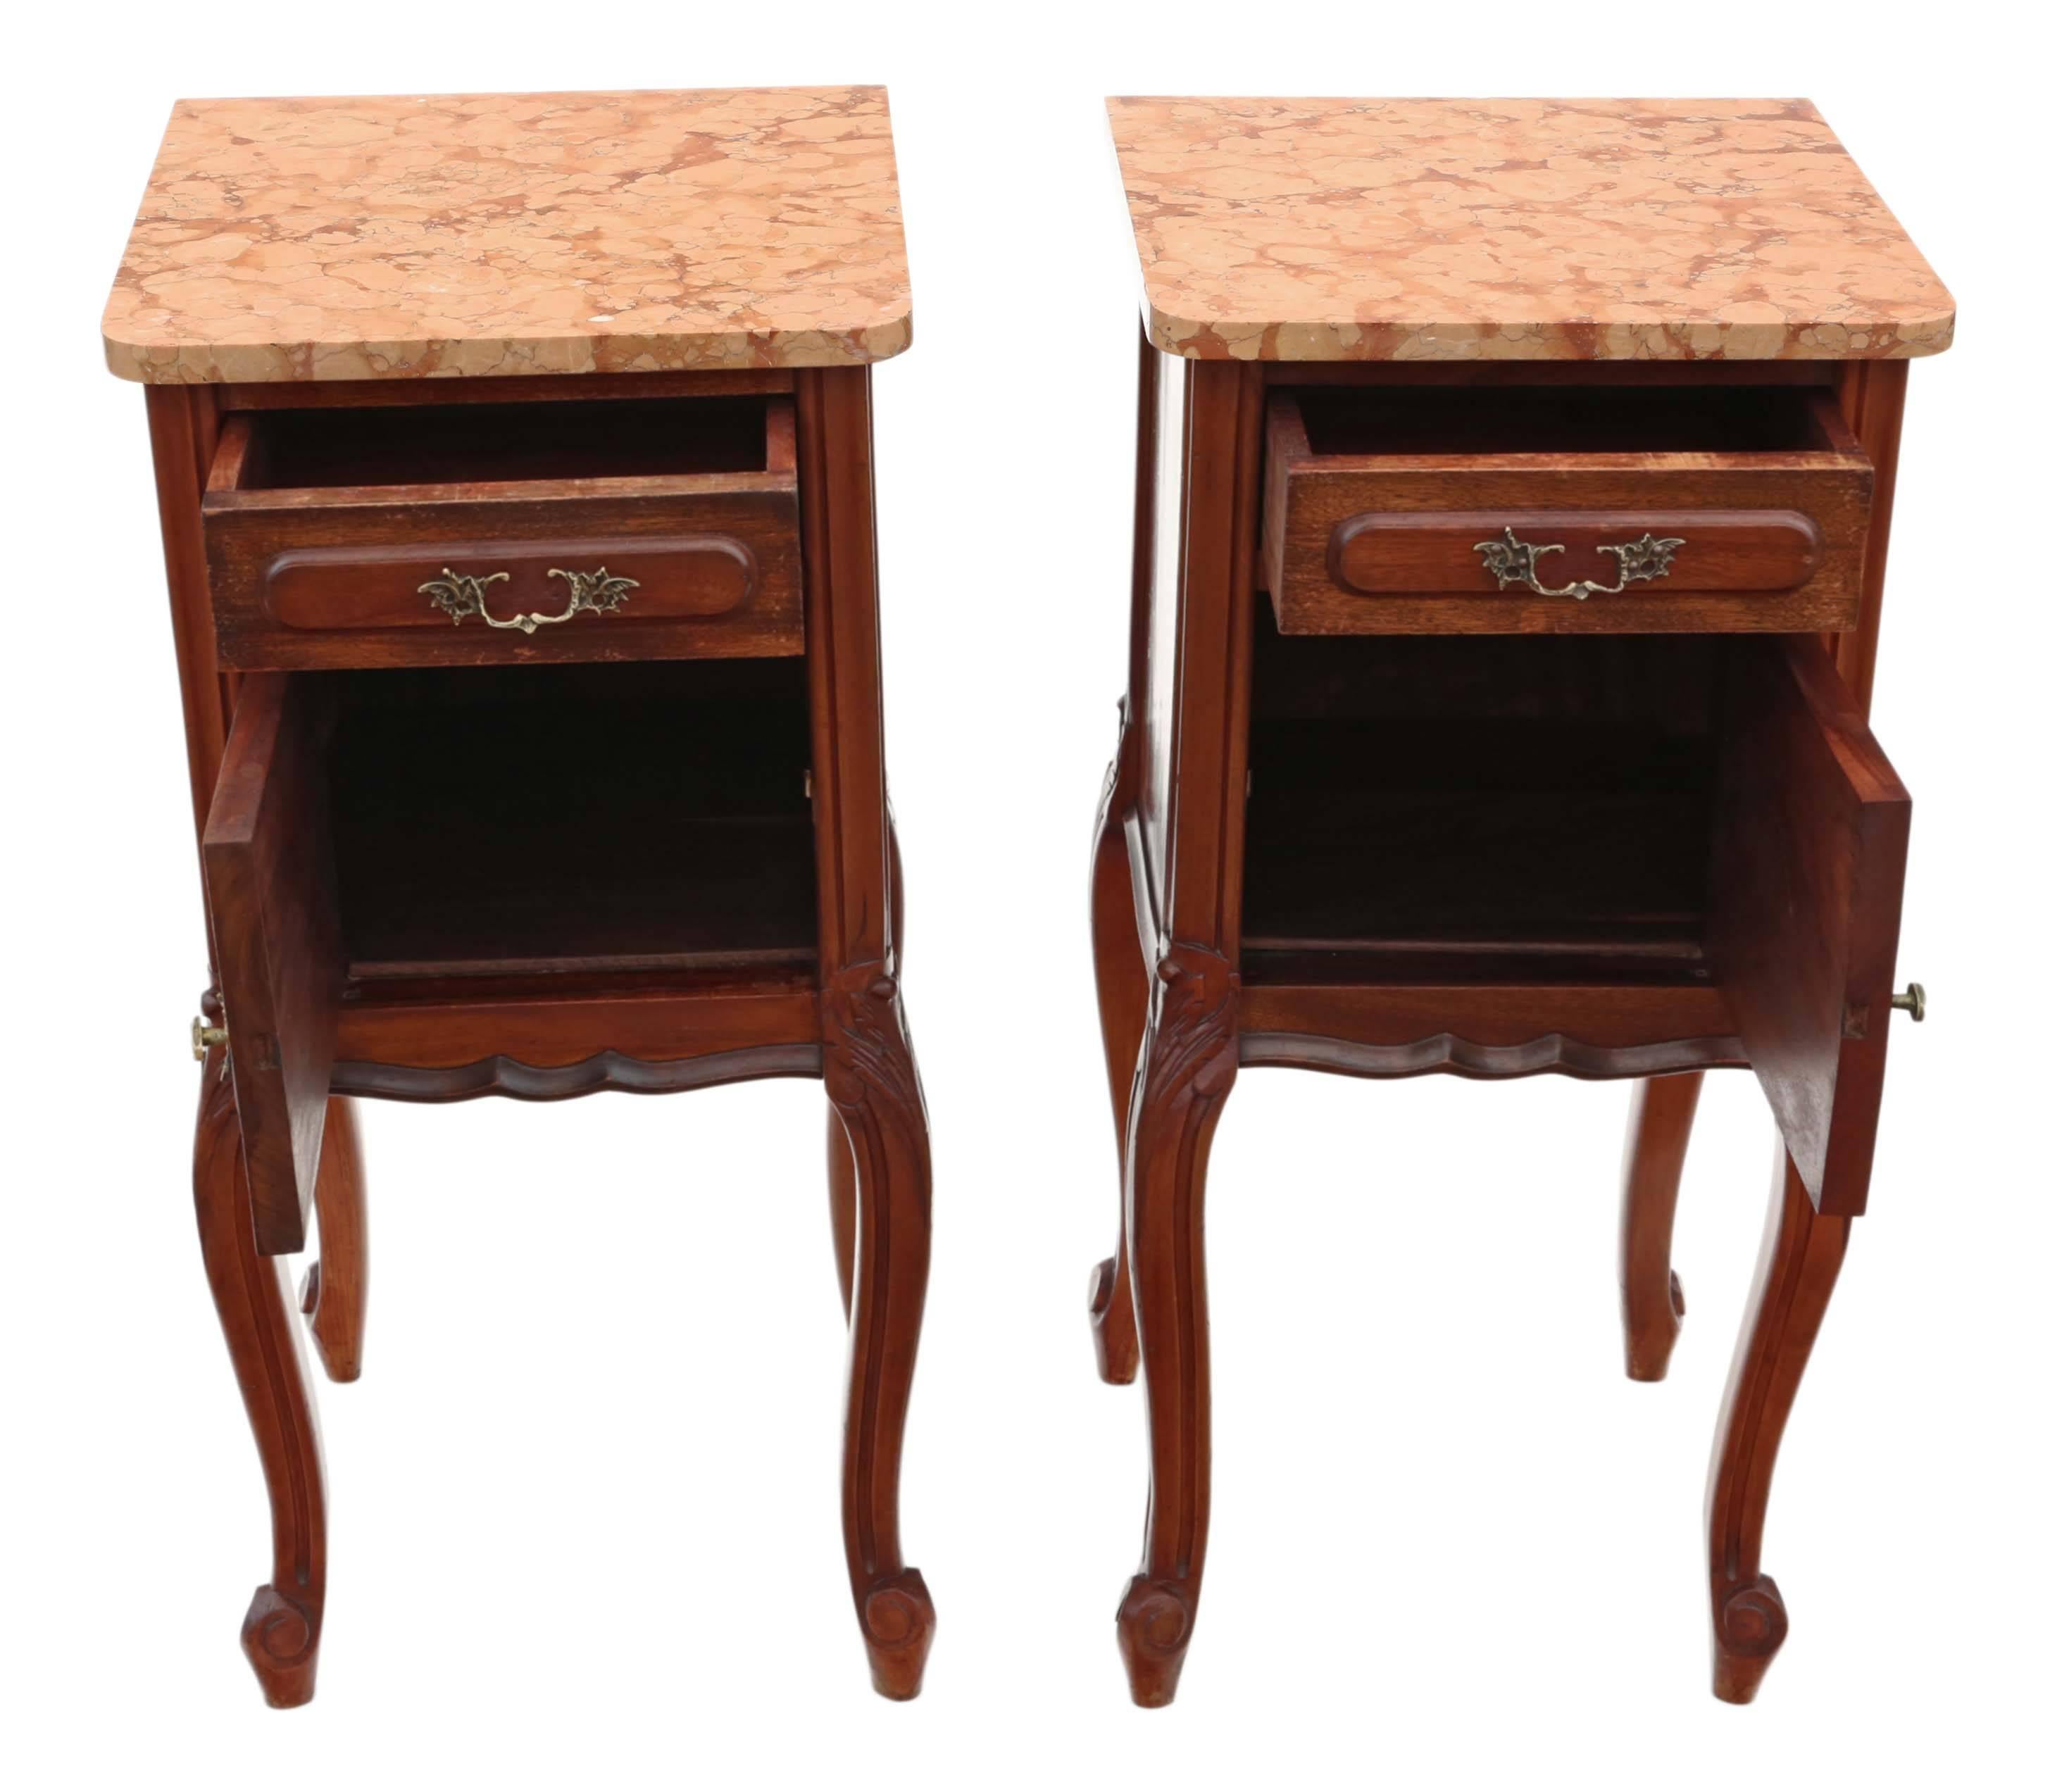 Antique Pair of French Walnut Marble Bedside Tables Cupboards Cabinets In Good Condition For Sale In Wisbech, Walton Wisbech